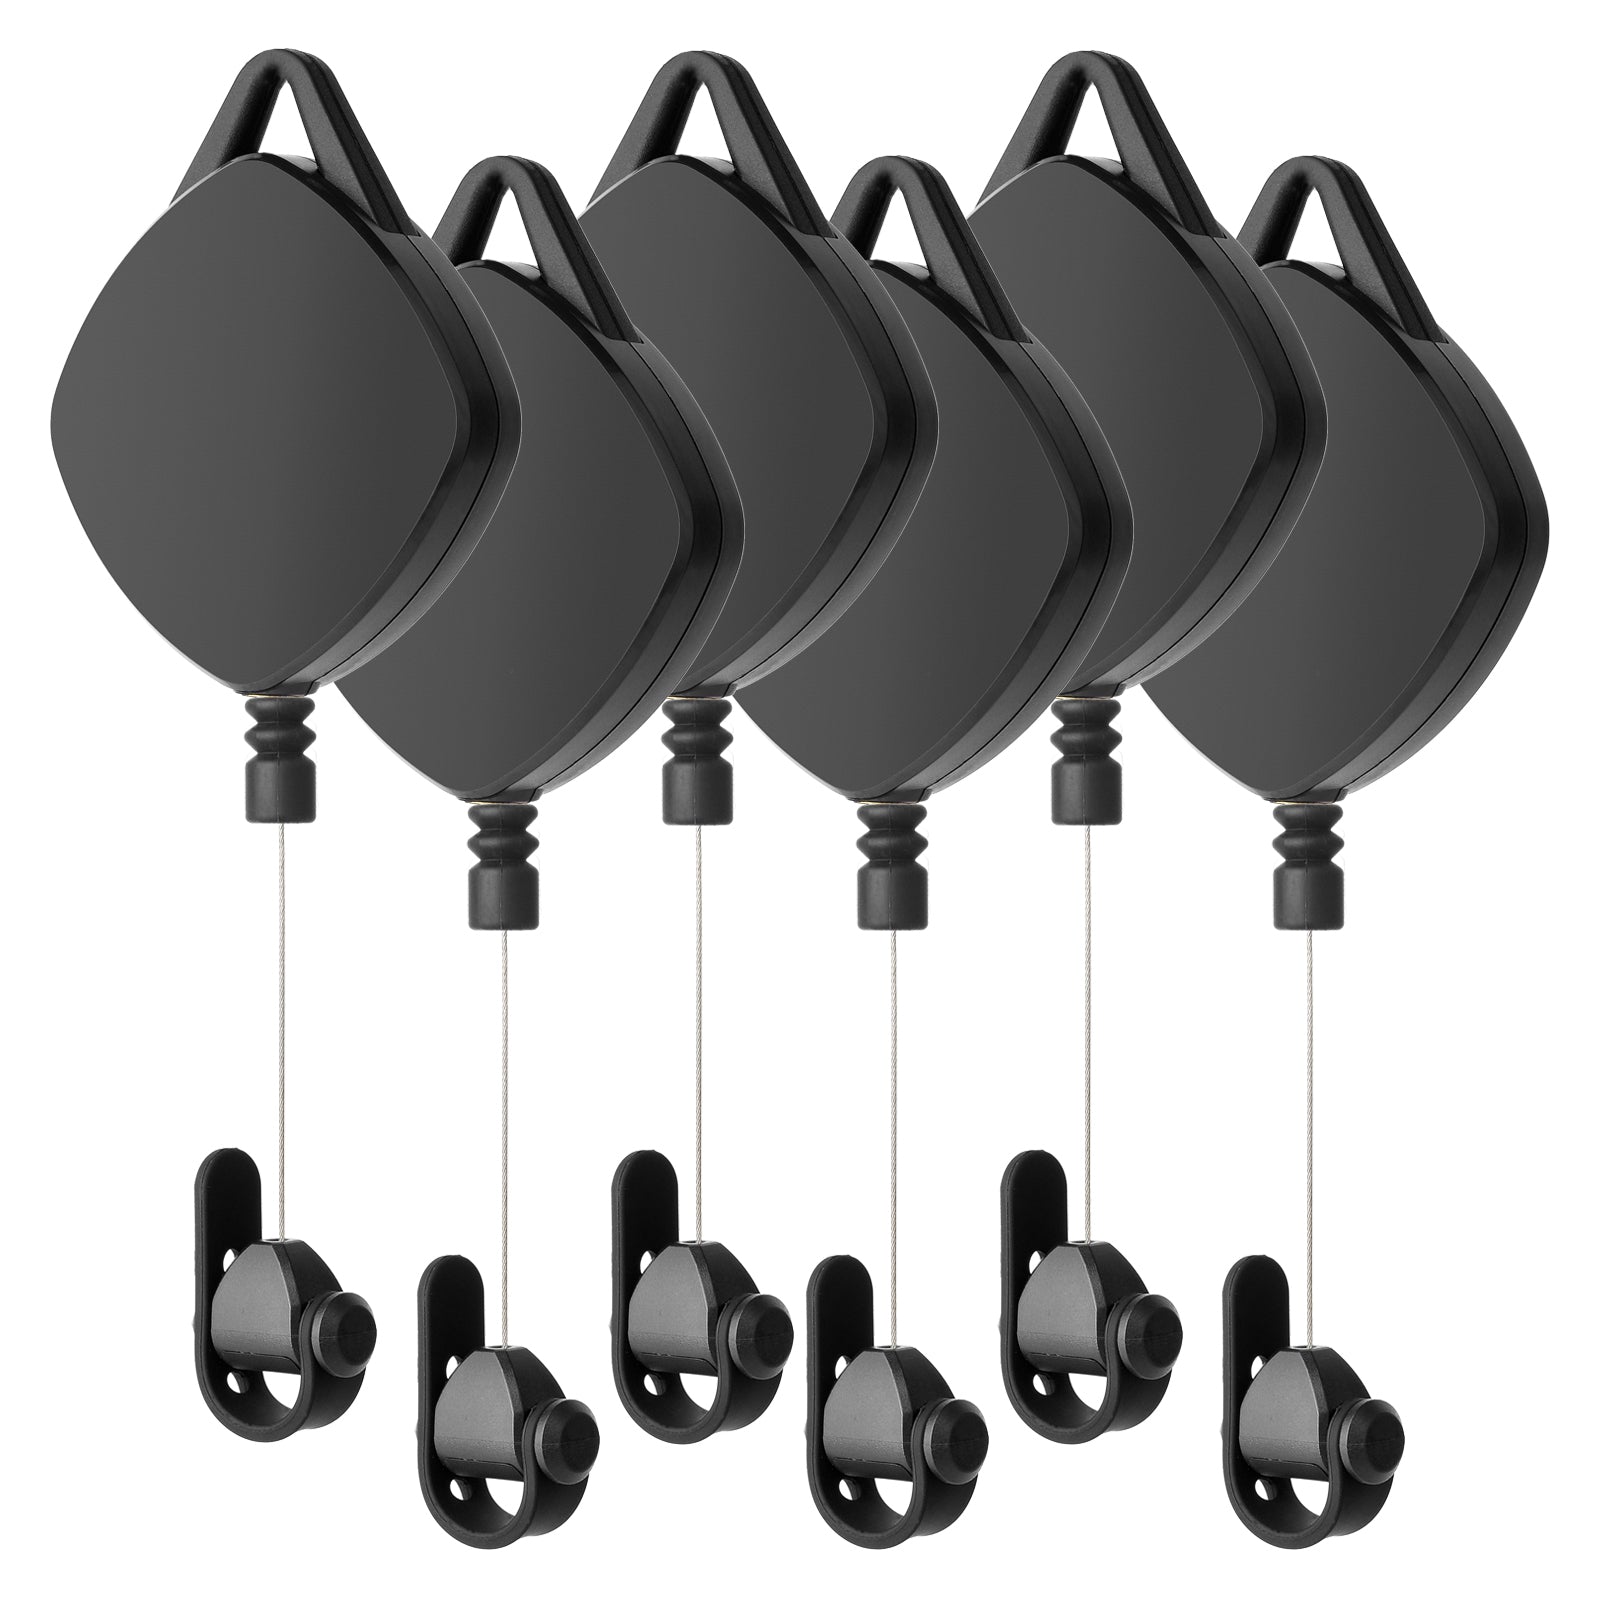 VR Cable Management, 6 Pack VR Pulley System Fits Quest/Rift S/Valve Index/HTC Vive/Vive Pro/HP Reverb G2/PSVR/PS VR2 VR Accessory, Compatible with Quest Link Cable Automatic Shrink Reel Box VR Pull Hook